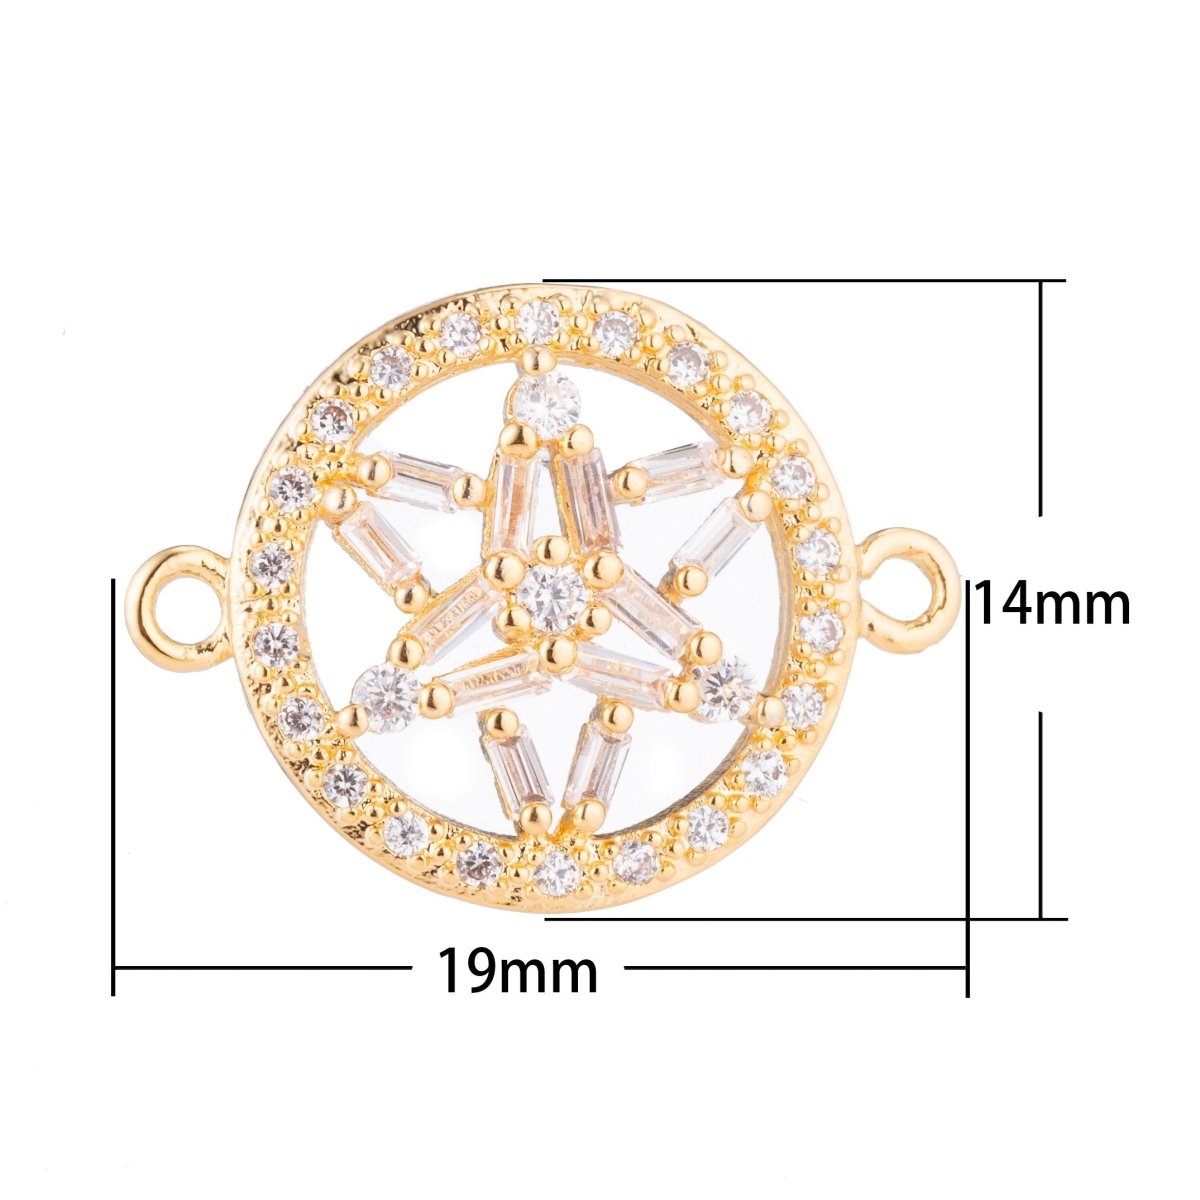 Gold Star, Celestial, Starry, DIY Handcrafted Ladies Gift, Cubic Zirconia Bracelet Charm, Necklace Pendant, Findings for Jewelry Making, F-156 - DLUXCA